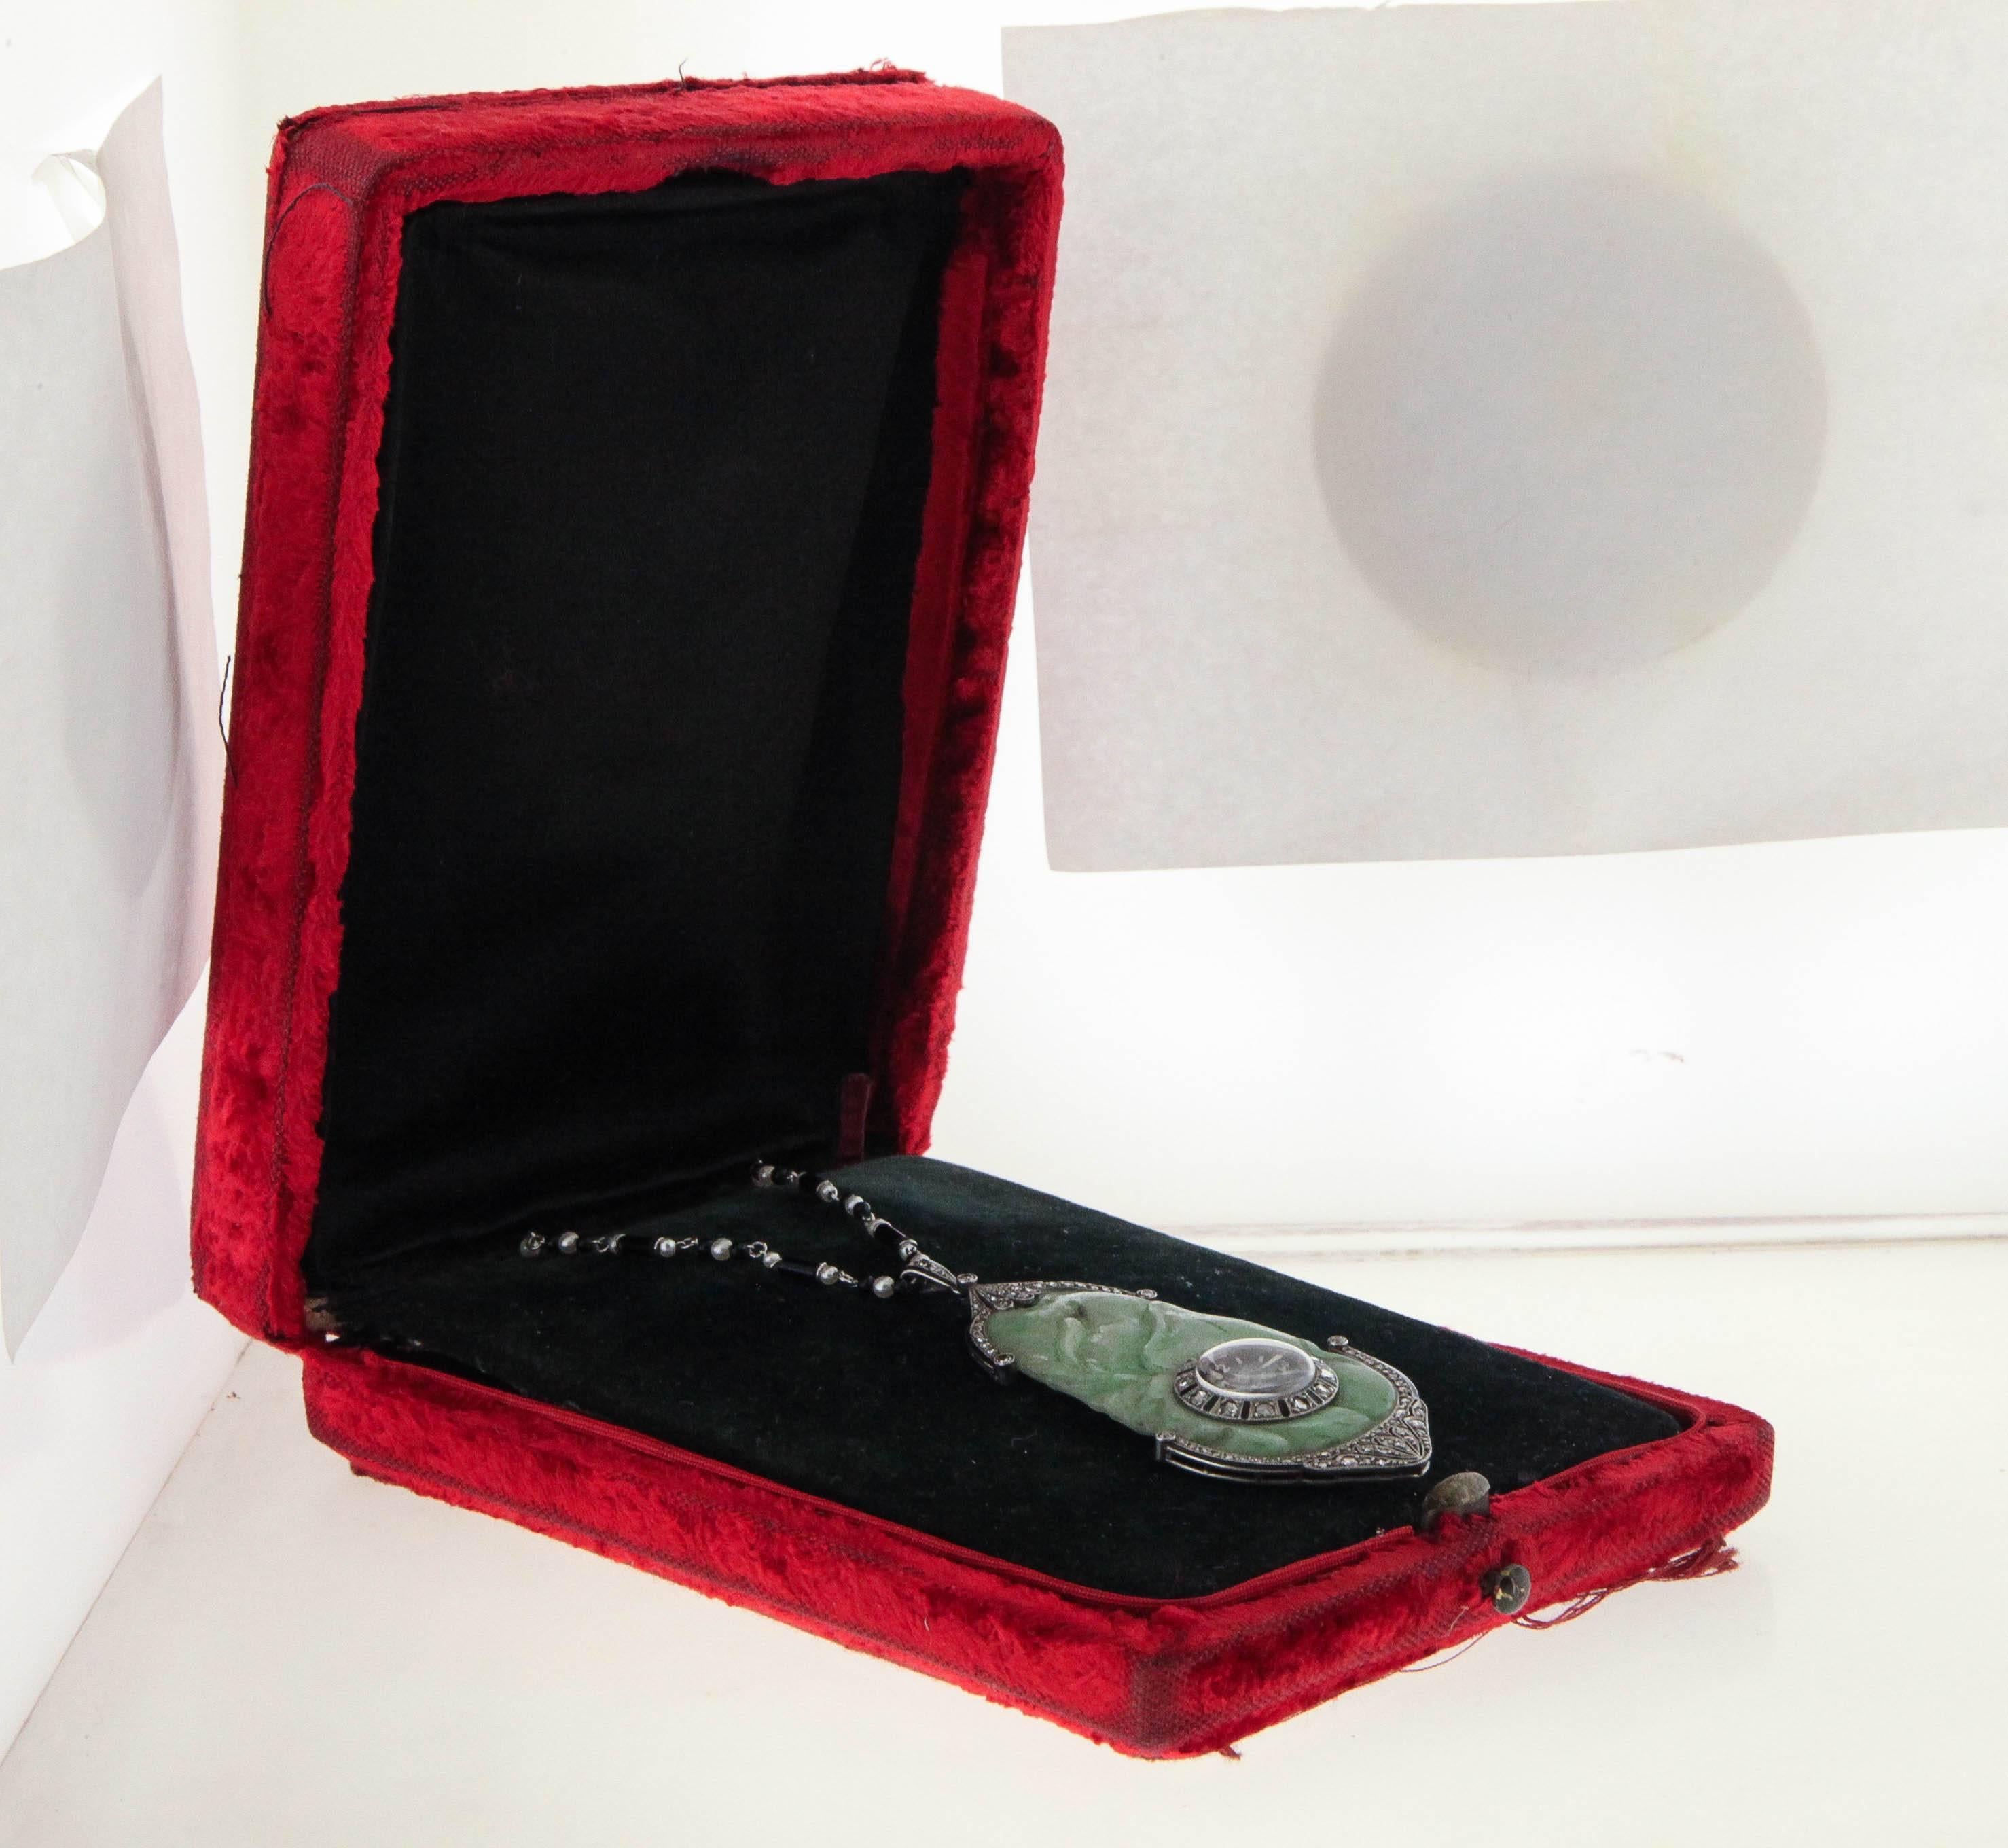 Art Deco jade and diamond pendant watch necklace, circa 1920's, made for the Buenos Aires retailer Ghiso. The carved jade pendant is framed top and bottom with platinum filigree framing set with rose-cut diamonds, the Jaeger LeCoultre watch inset